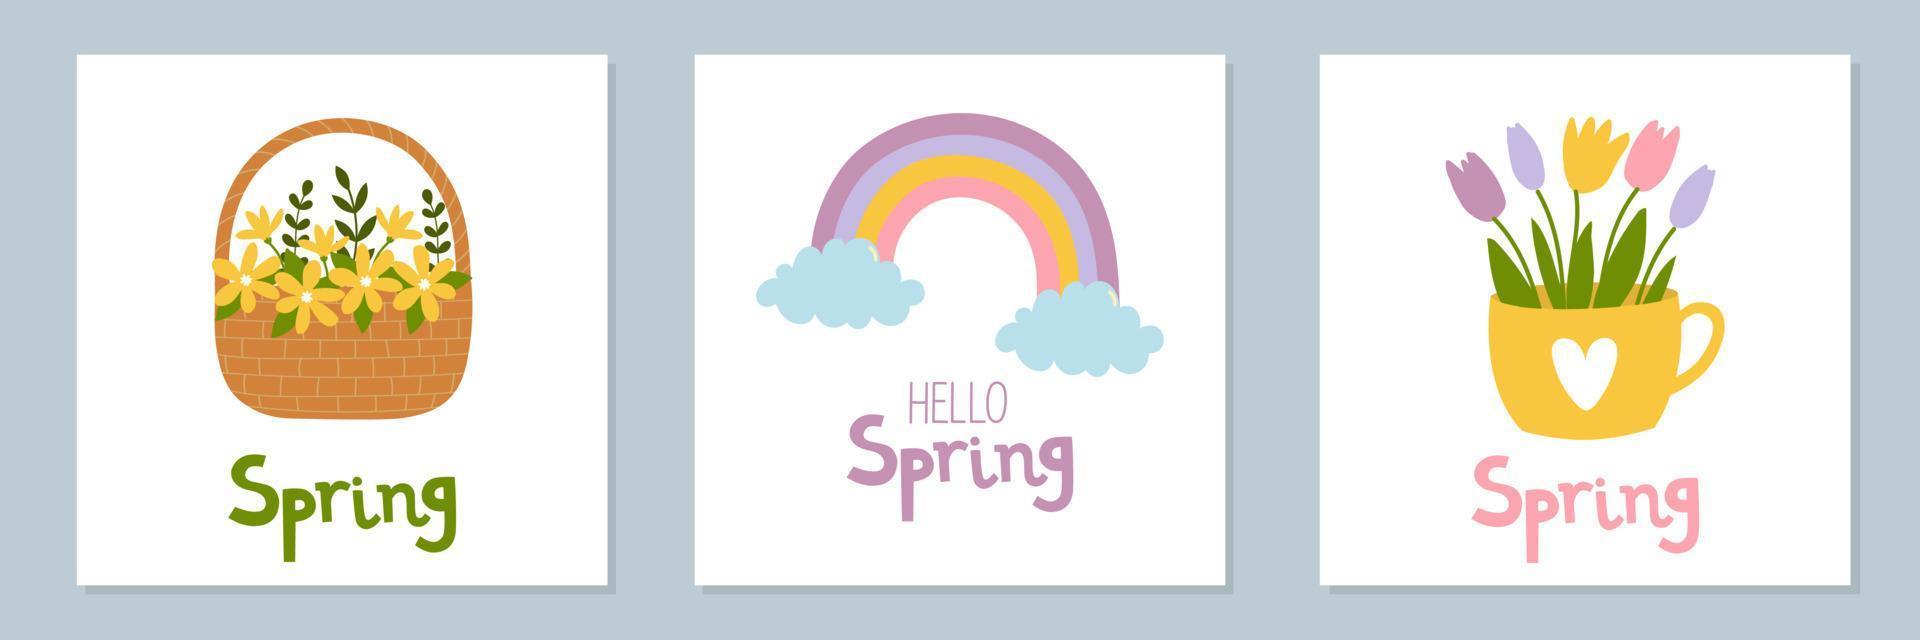 Set of spring mood posters template. Welcome spring season greeting card. Minimalist postcards with cute cartoon elements and lettering. Doodle flat style vector